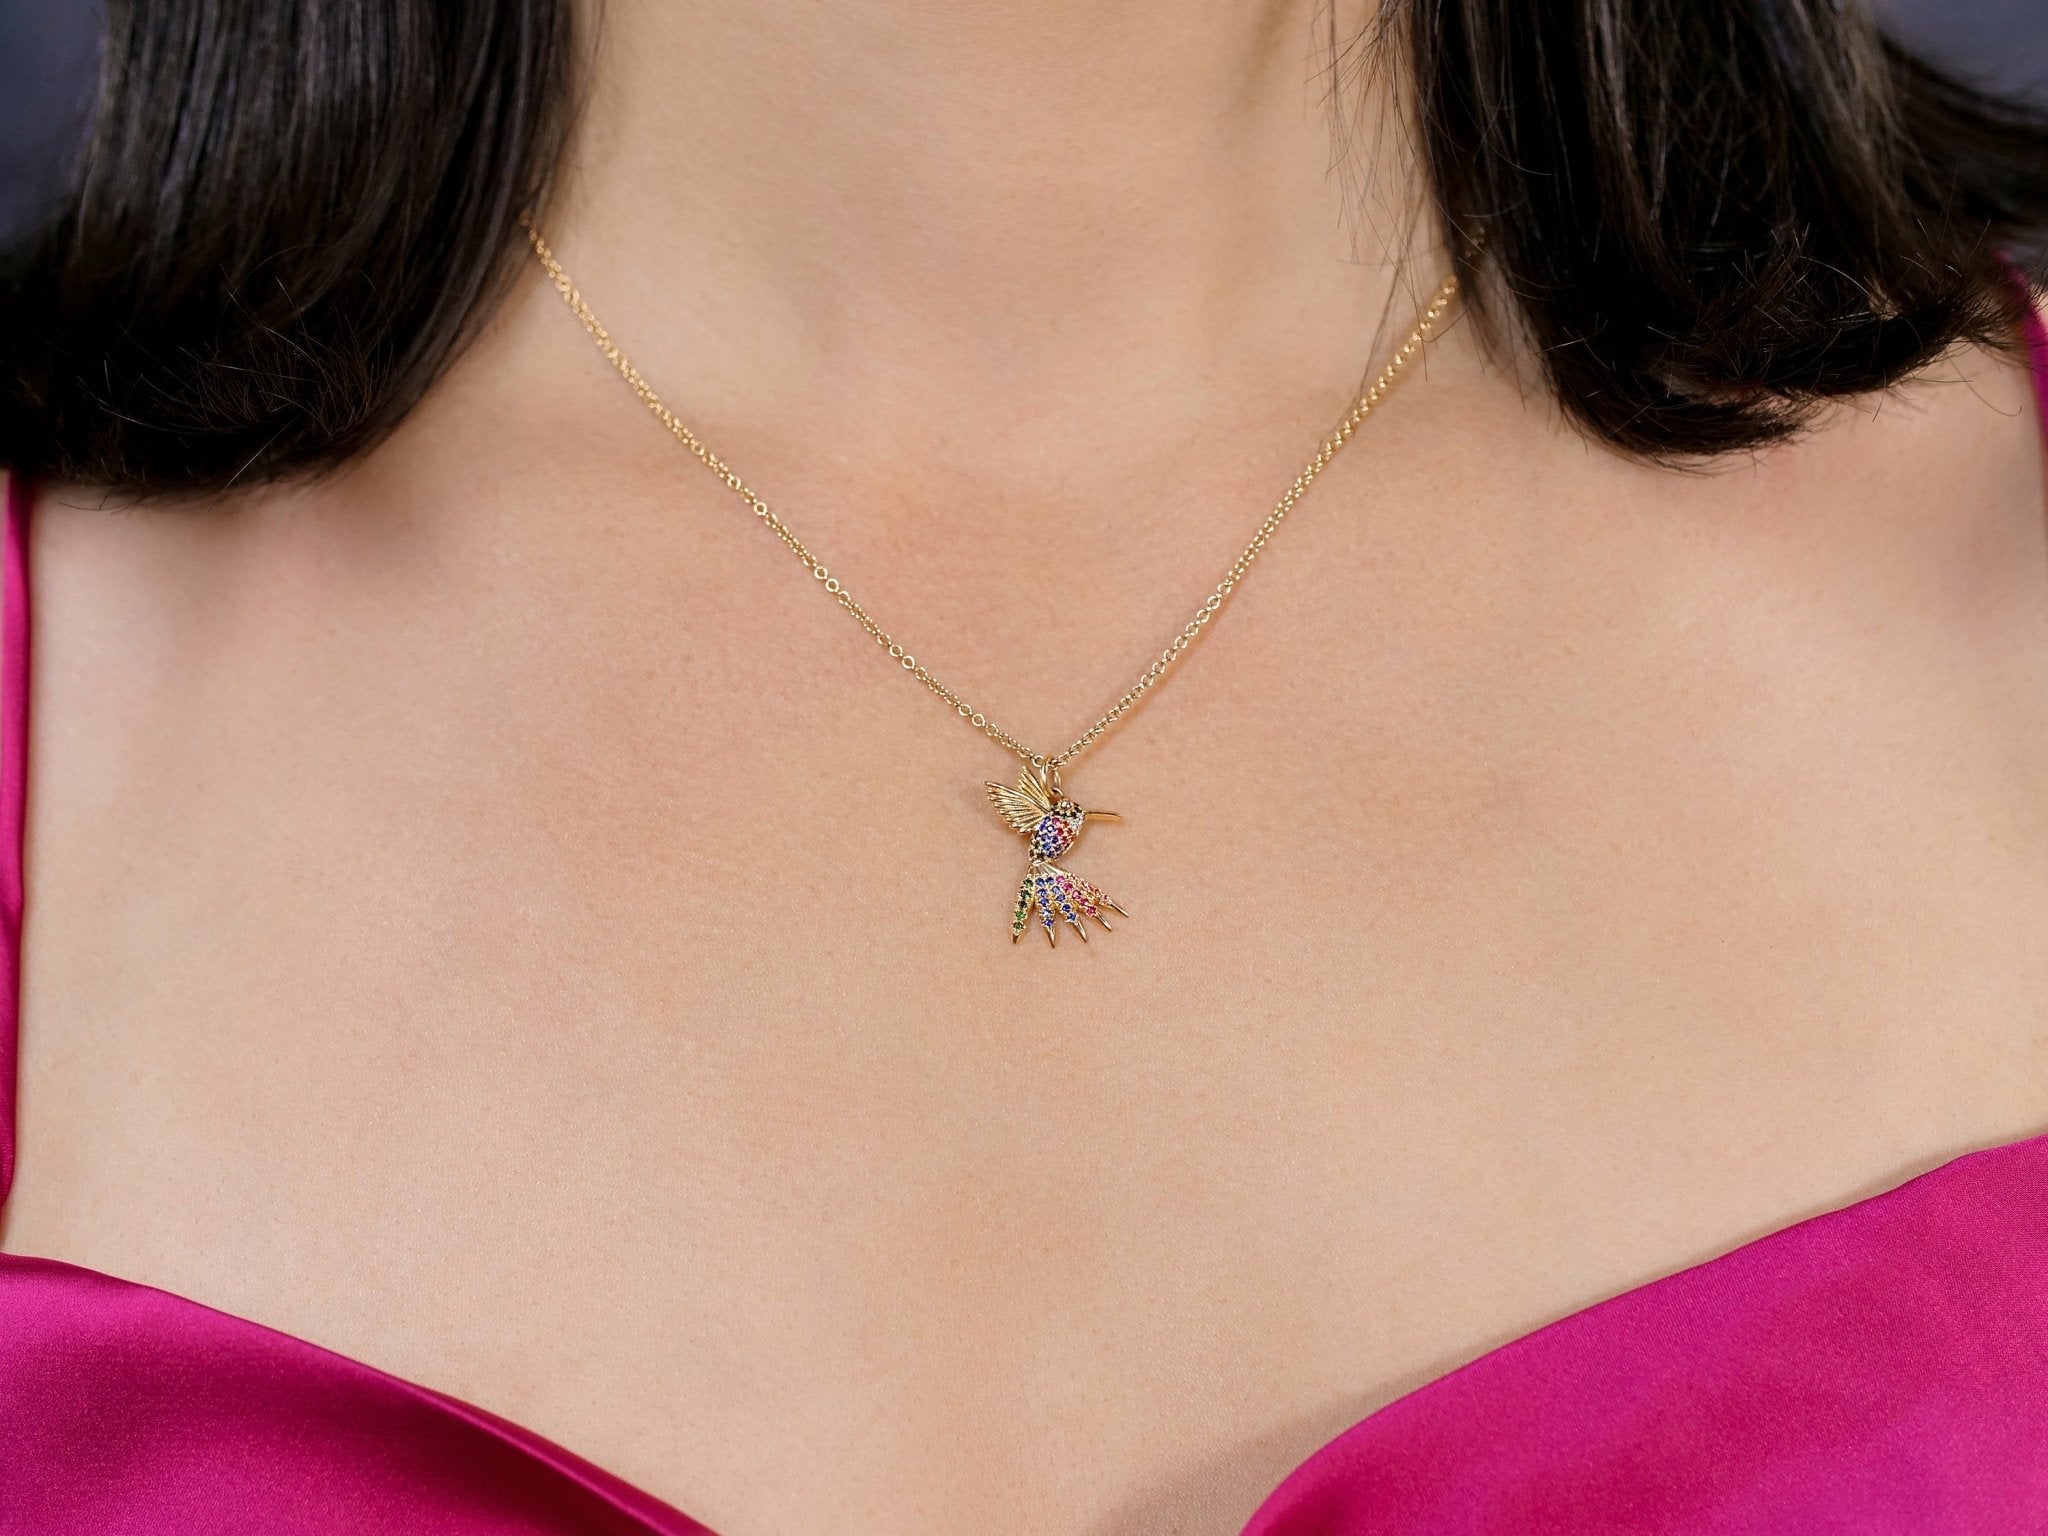 Rainbow Hummingbird Pendant & Necklace in Solid Gold – The “Humming Beauty” Set - Aurora Laffite Jewelry